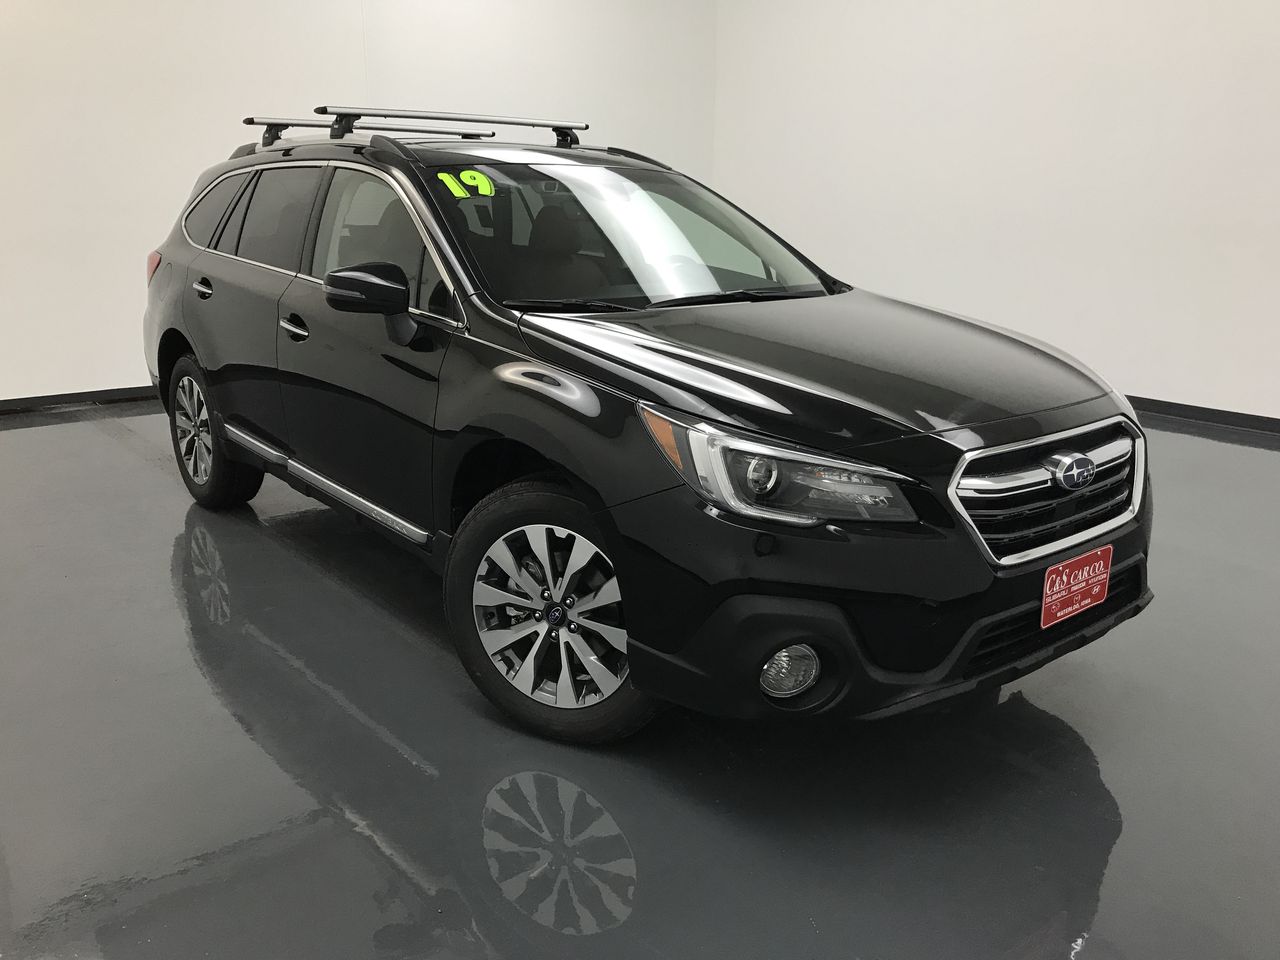 2019 Subaru Outback Roof Rack Weight Limit - Greatest Subaru 2011 Subaru Outback Roof Rack Weight Limit